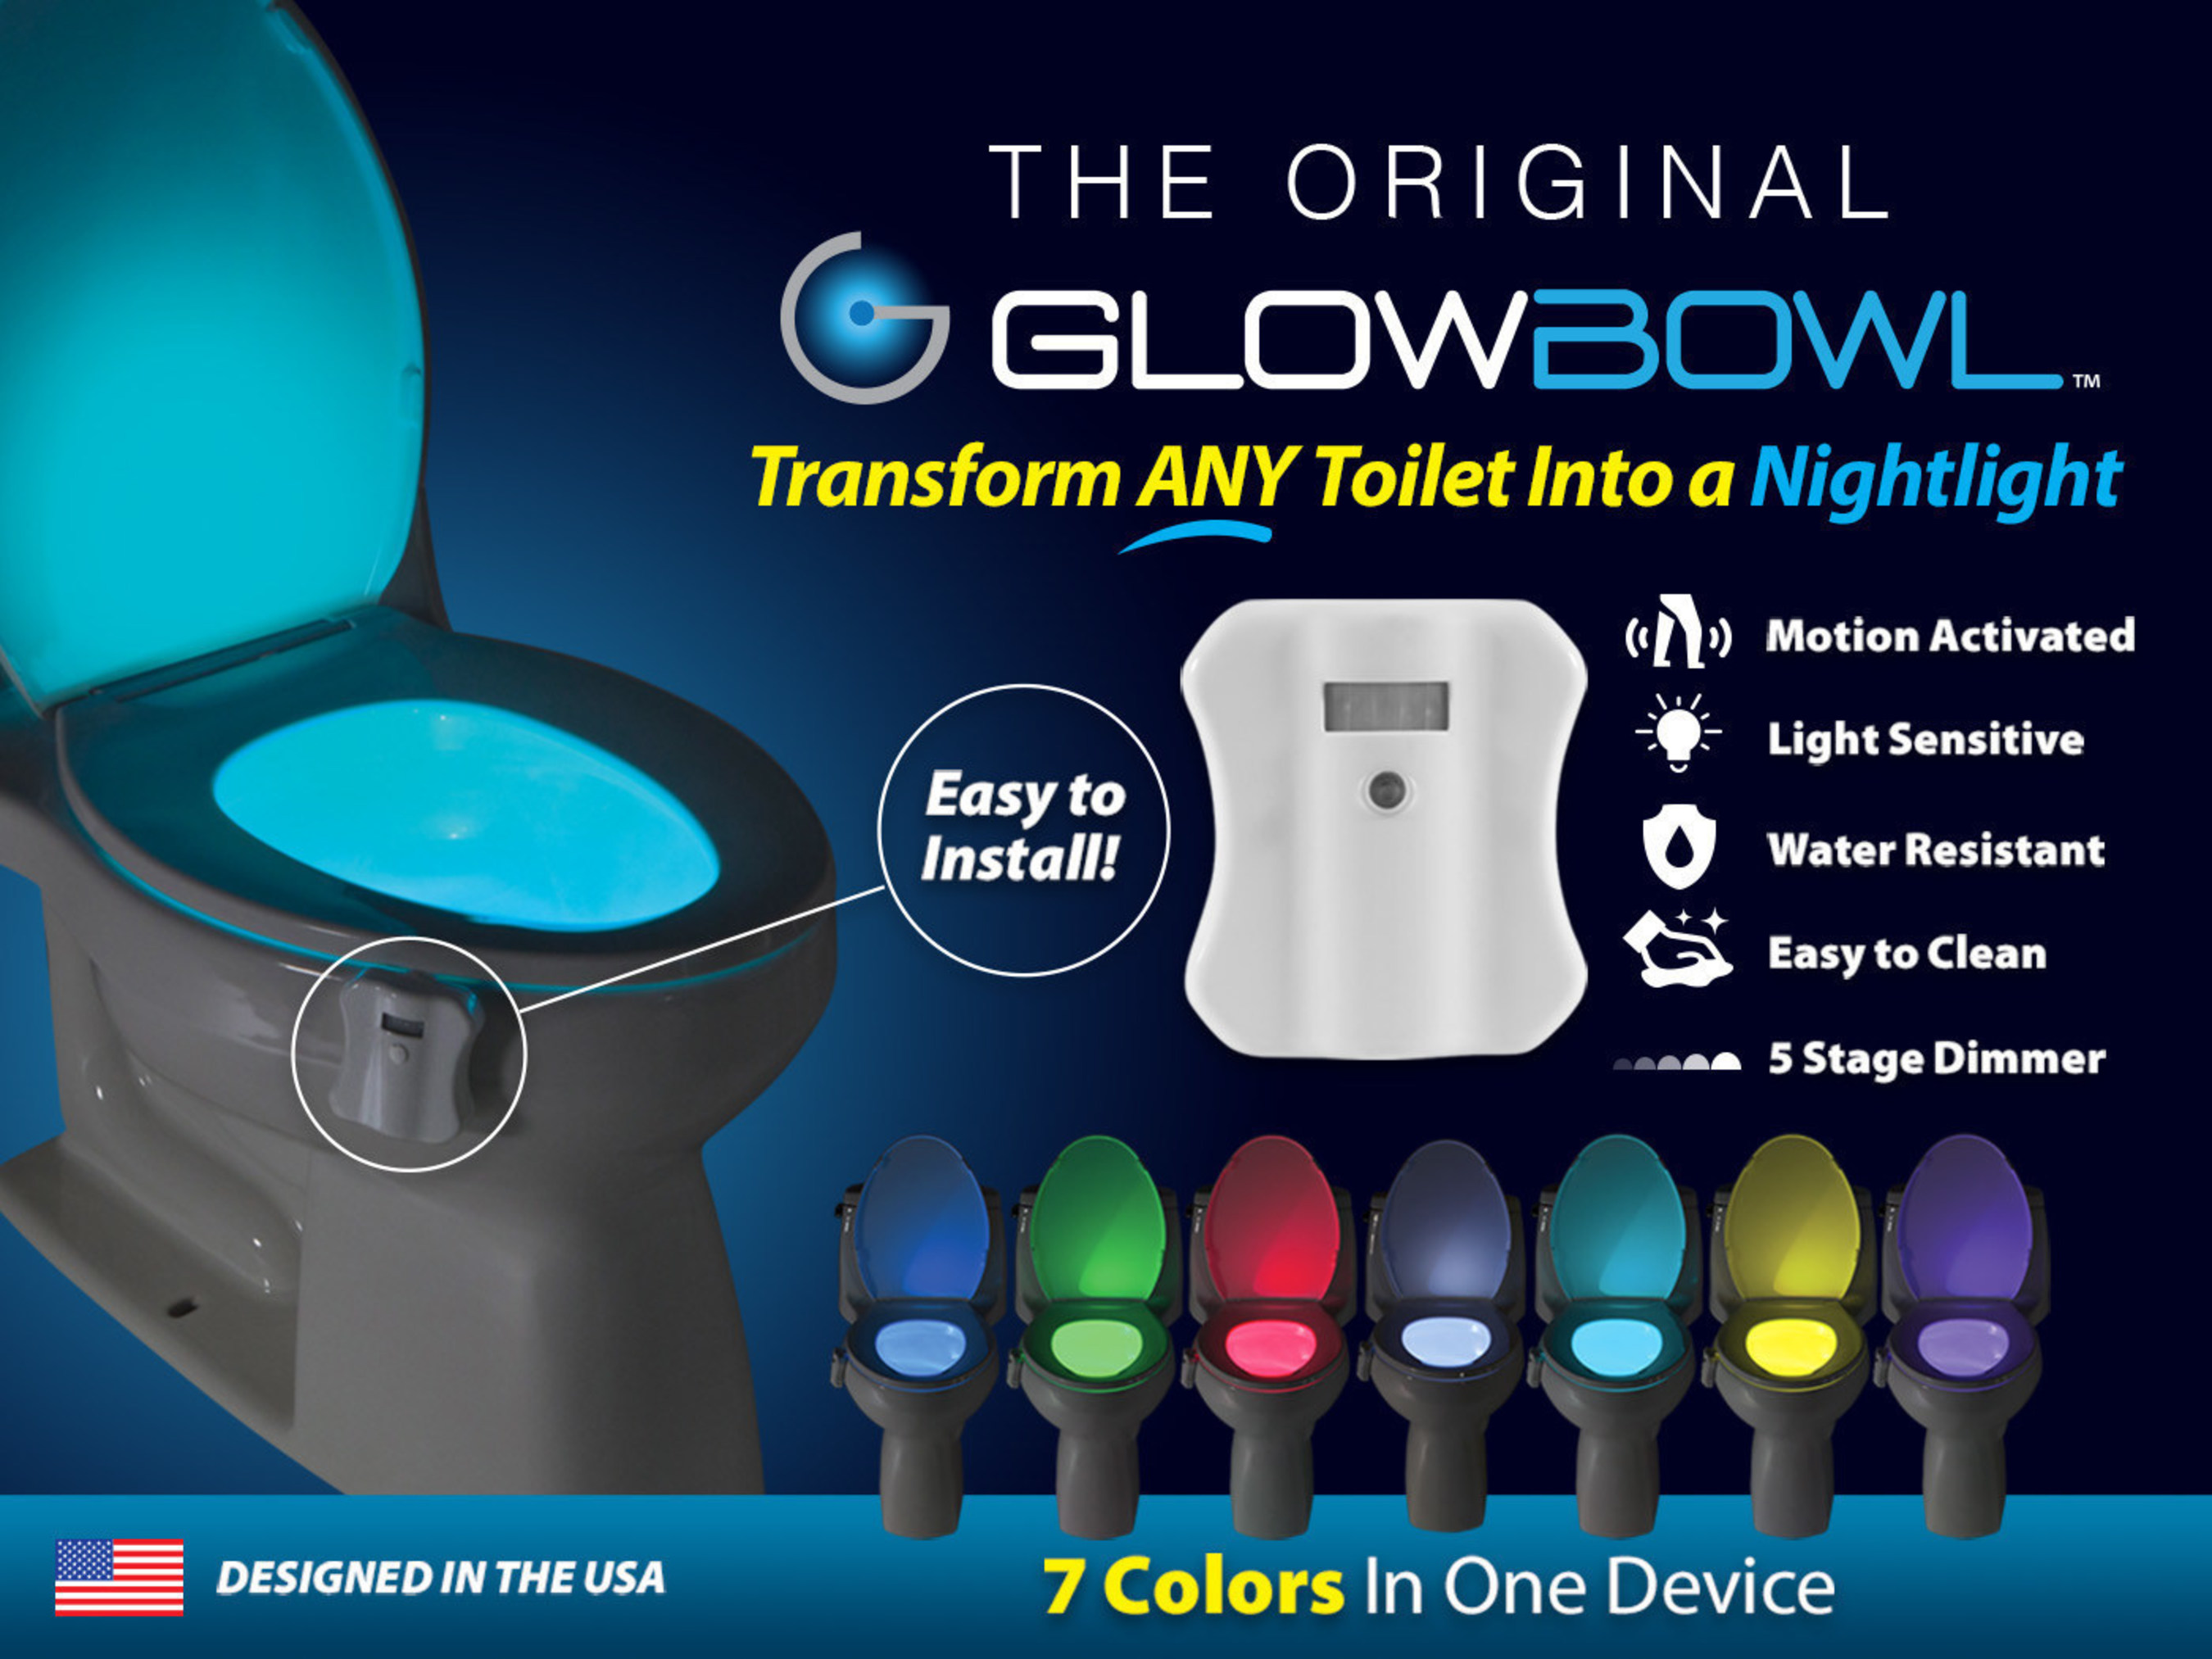 Make your toilet a disco bowl with this glowing night light: Now